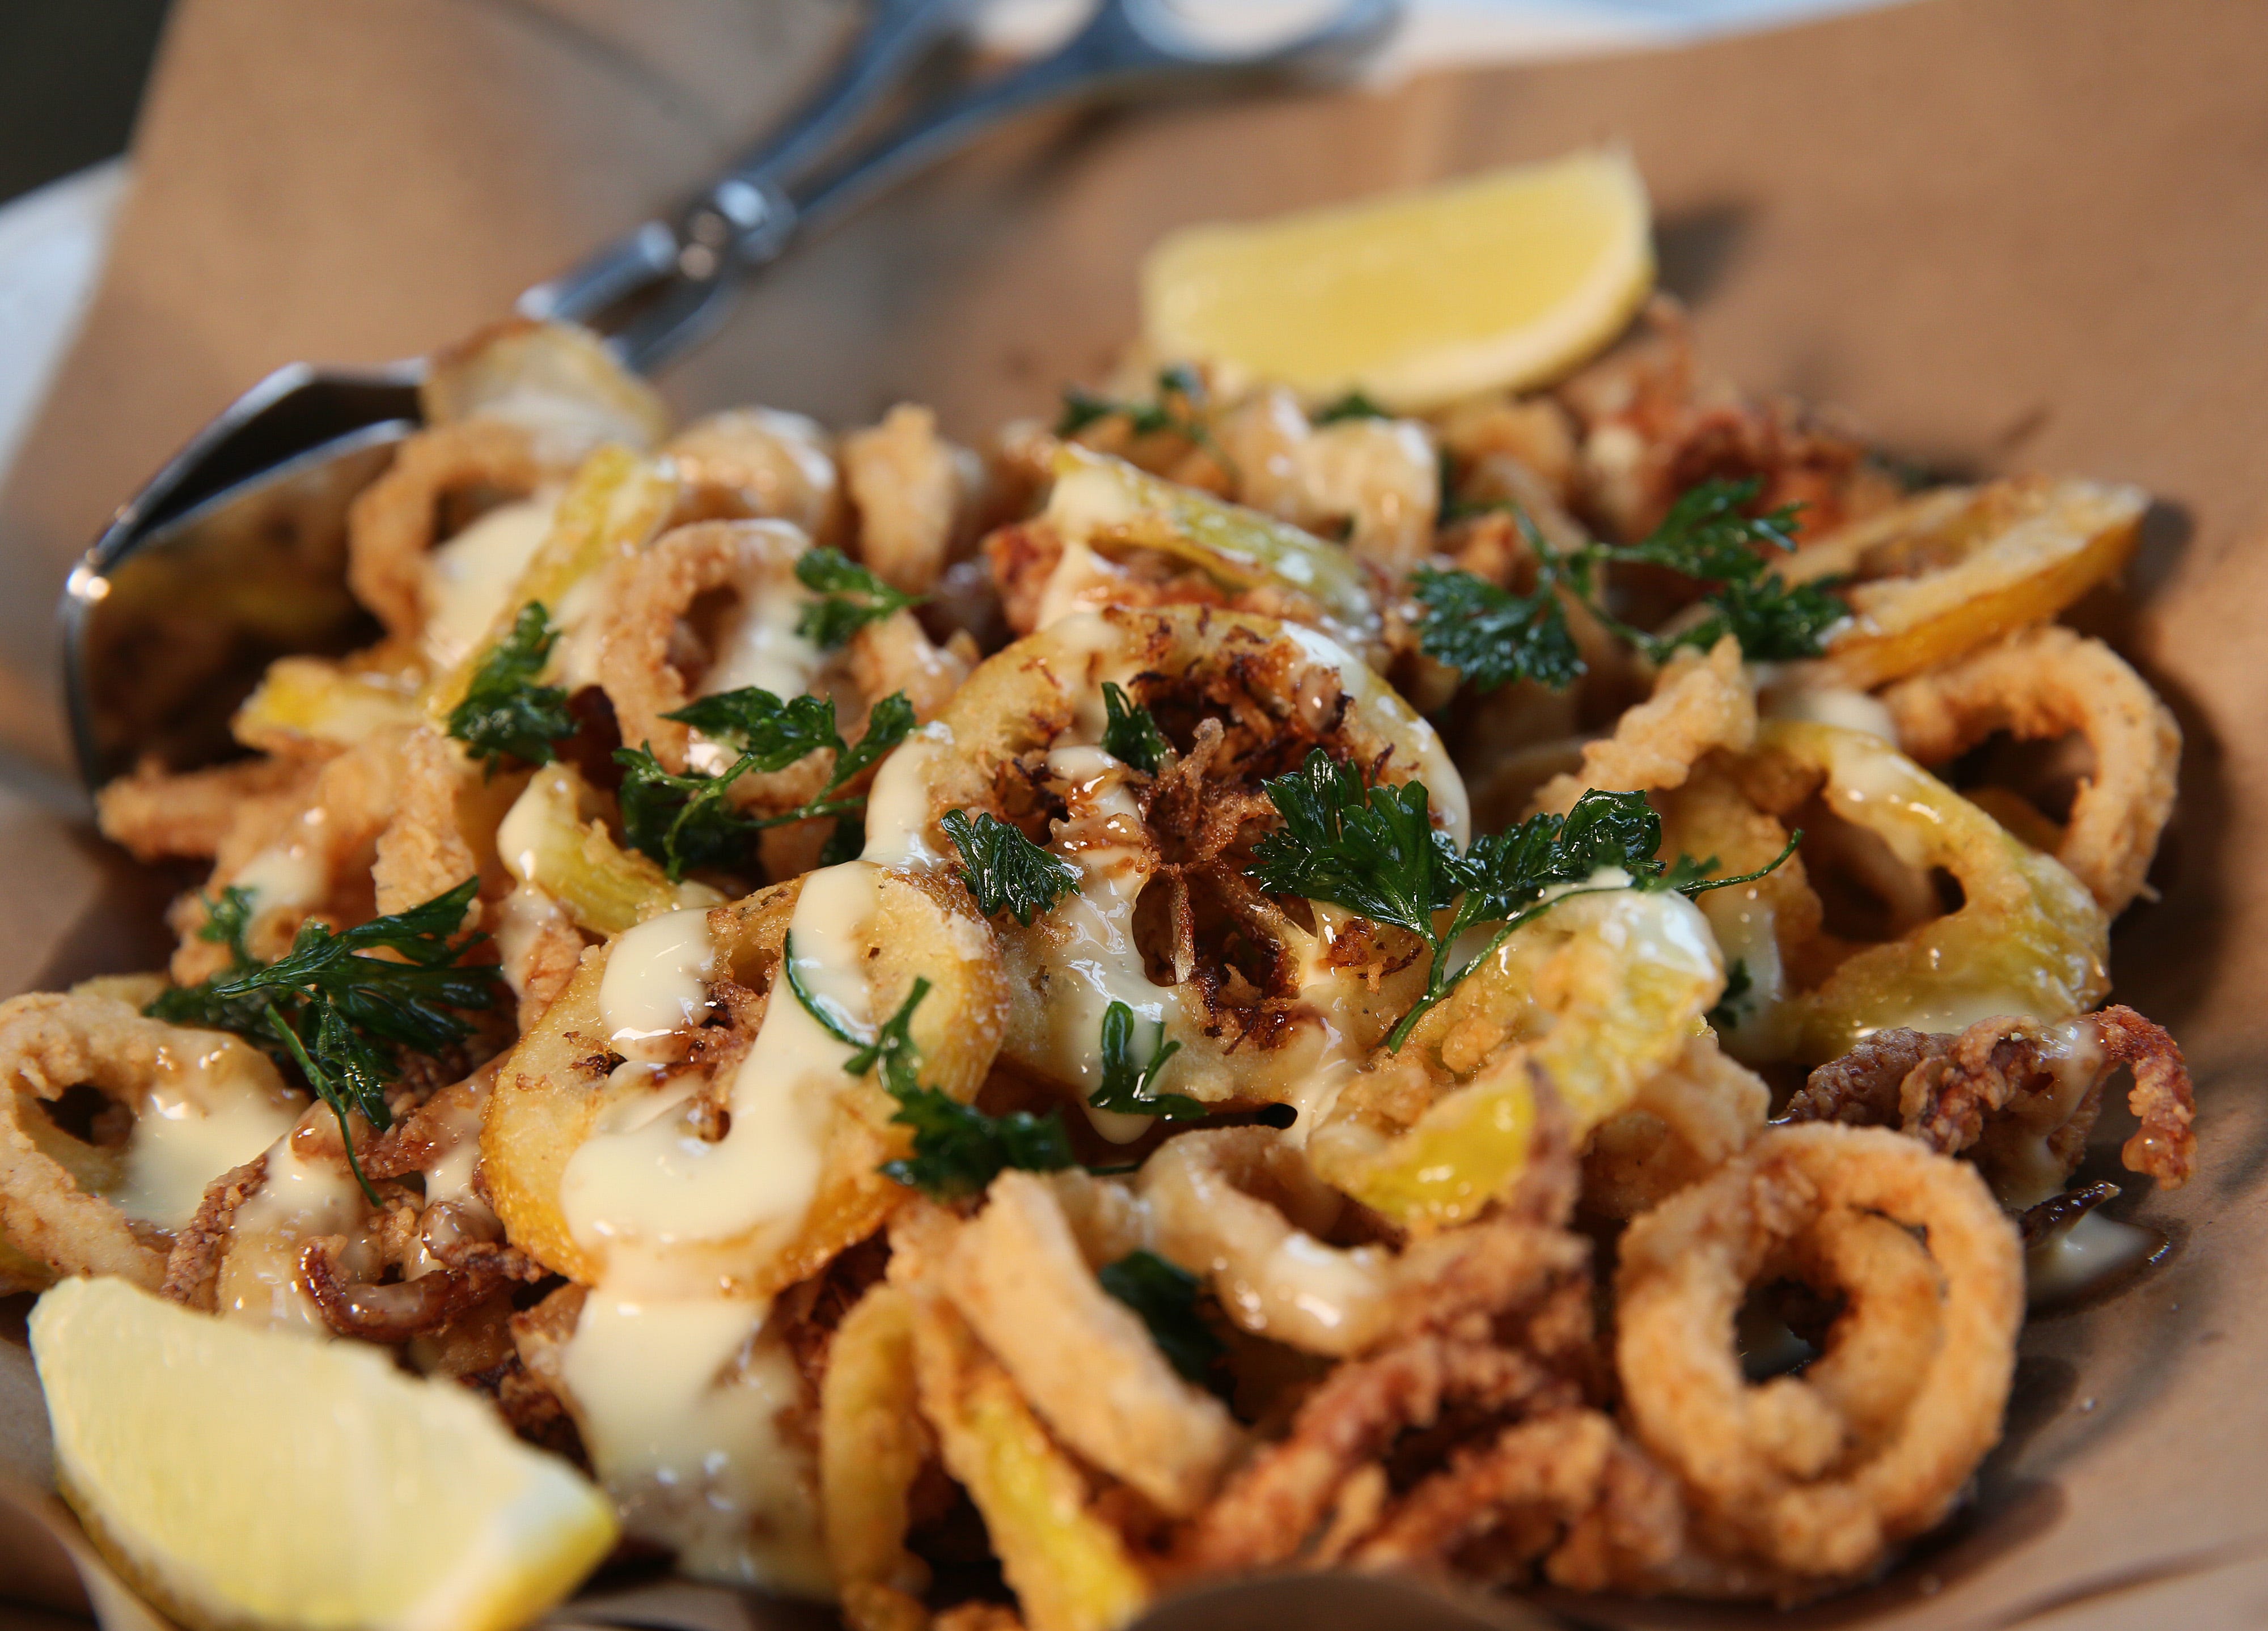 Fried calamari at Buttermint Finer Dining in Shorewood is combined with fried banana peppers, onion and lemon, and garnished with preserved-lemon aioli.